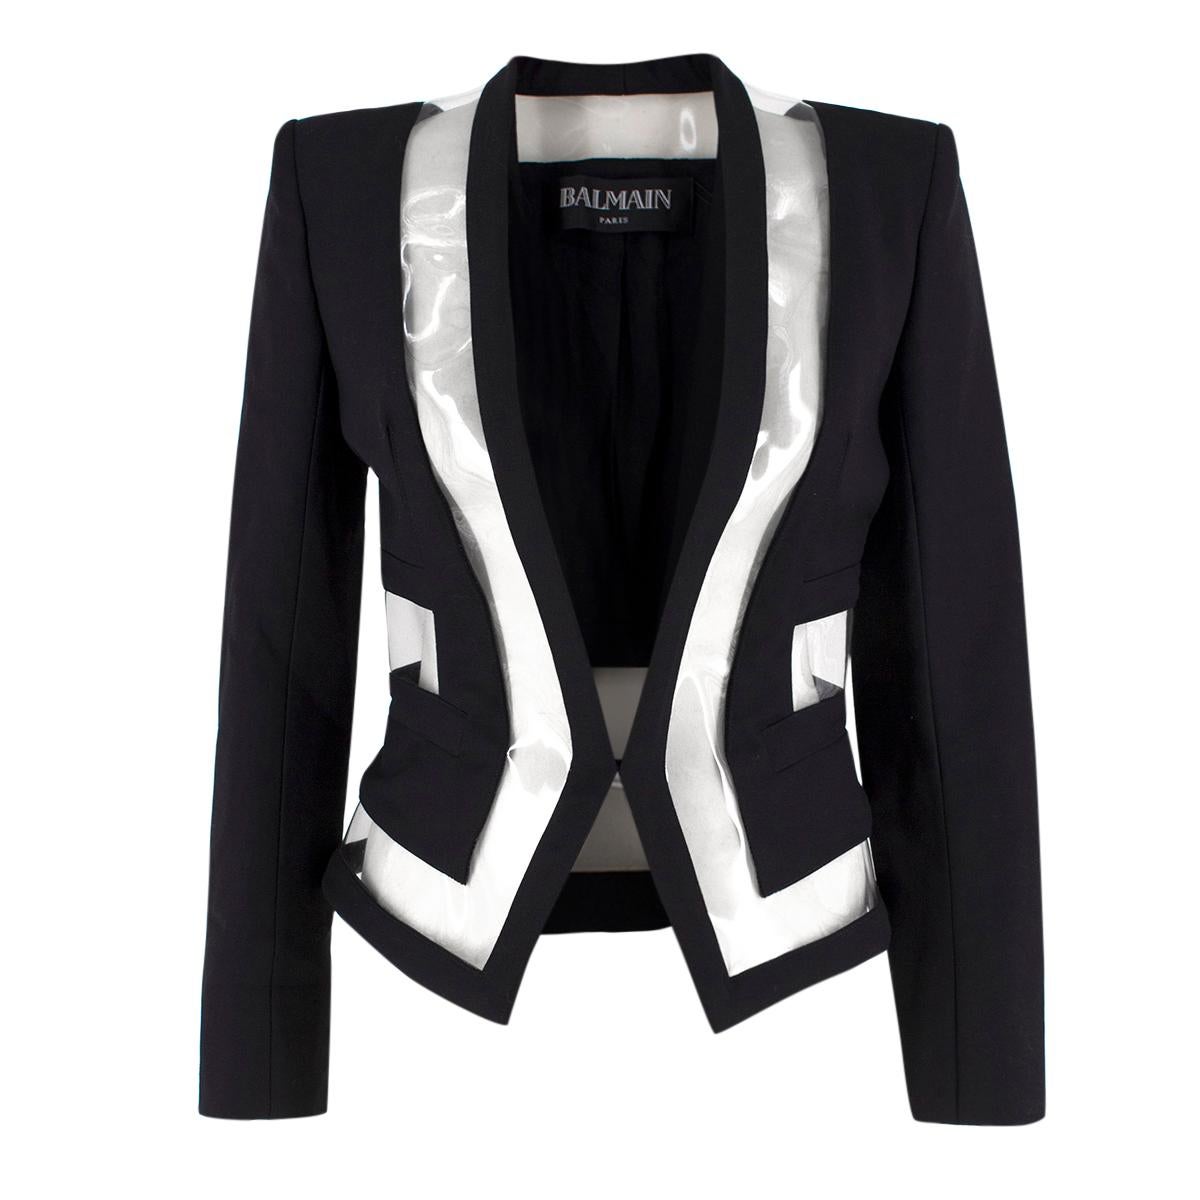 Balmain PVC-insert Wool Blazer

-Black blazer with transparent pvc panels
-Hook and eye closure
-Shoulder pads
-Popper closure on cuffs

Please note, these items are pre-owned and may show signs of being stored even when unworn and unused. This is